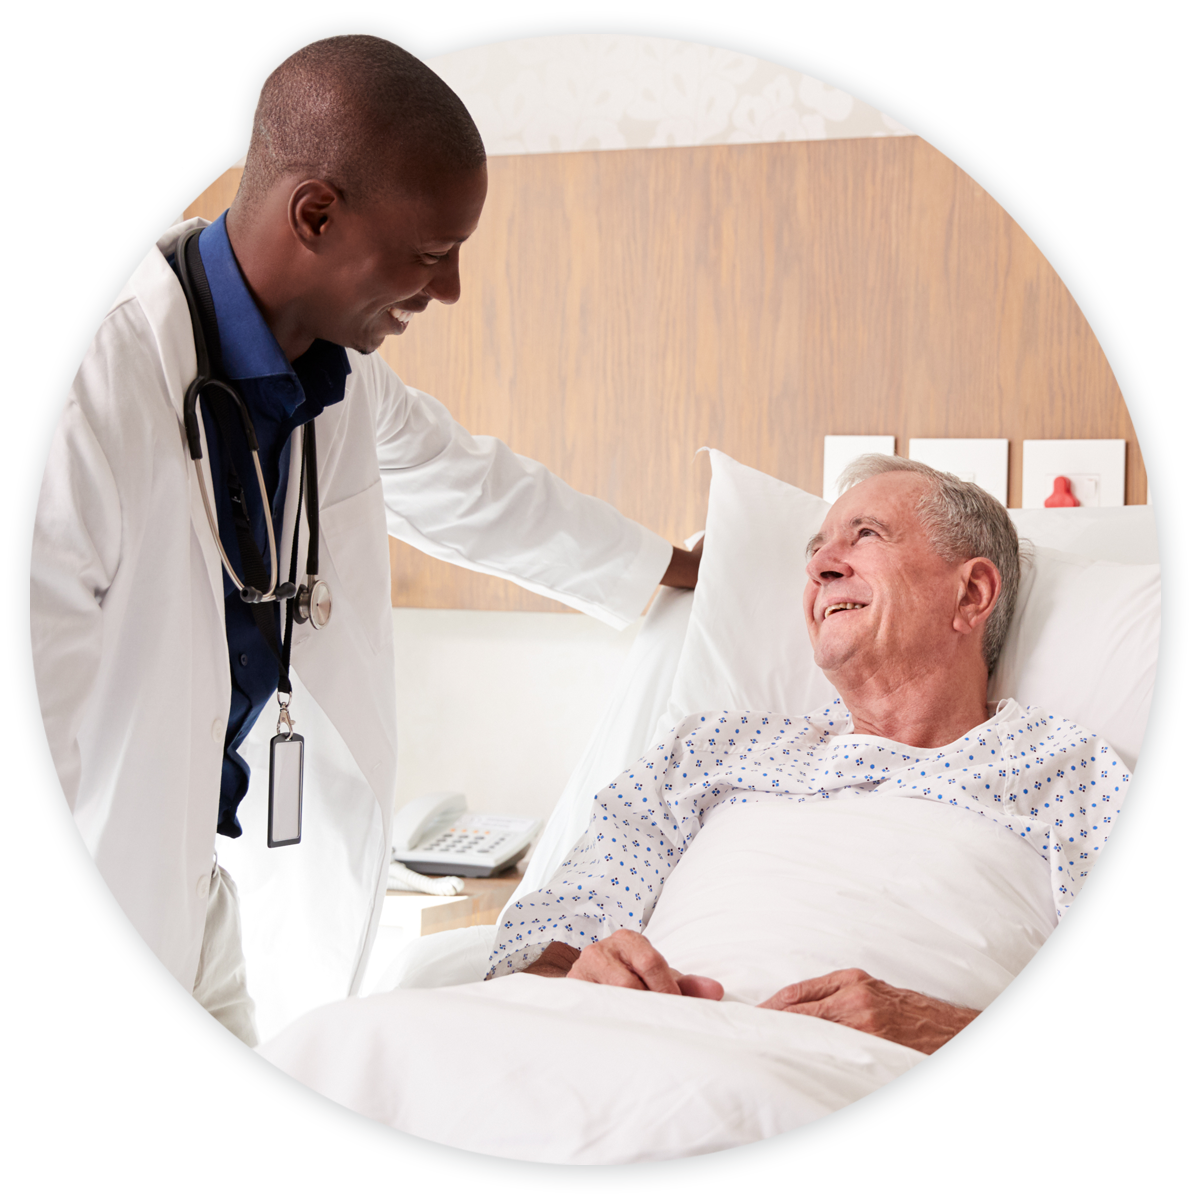 Doctor talking to cardiology patient in hospital bed